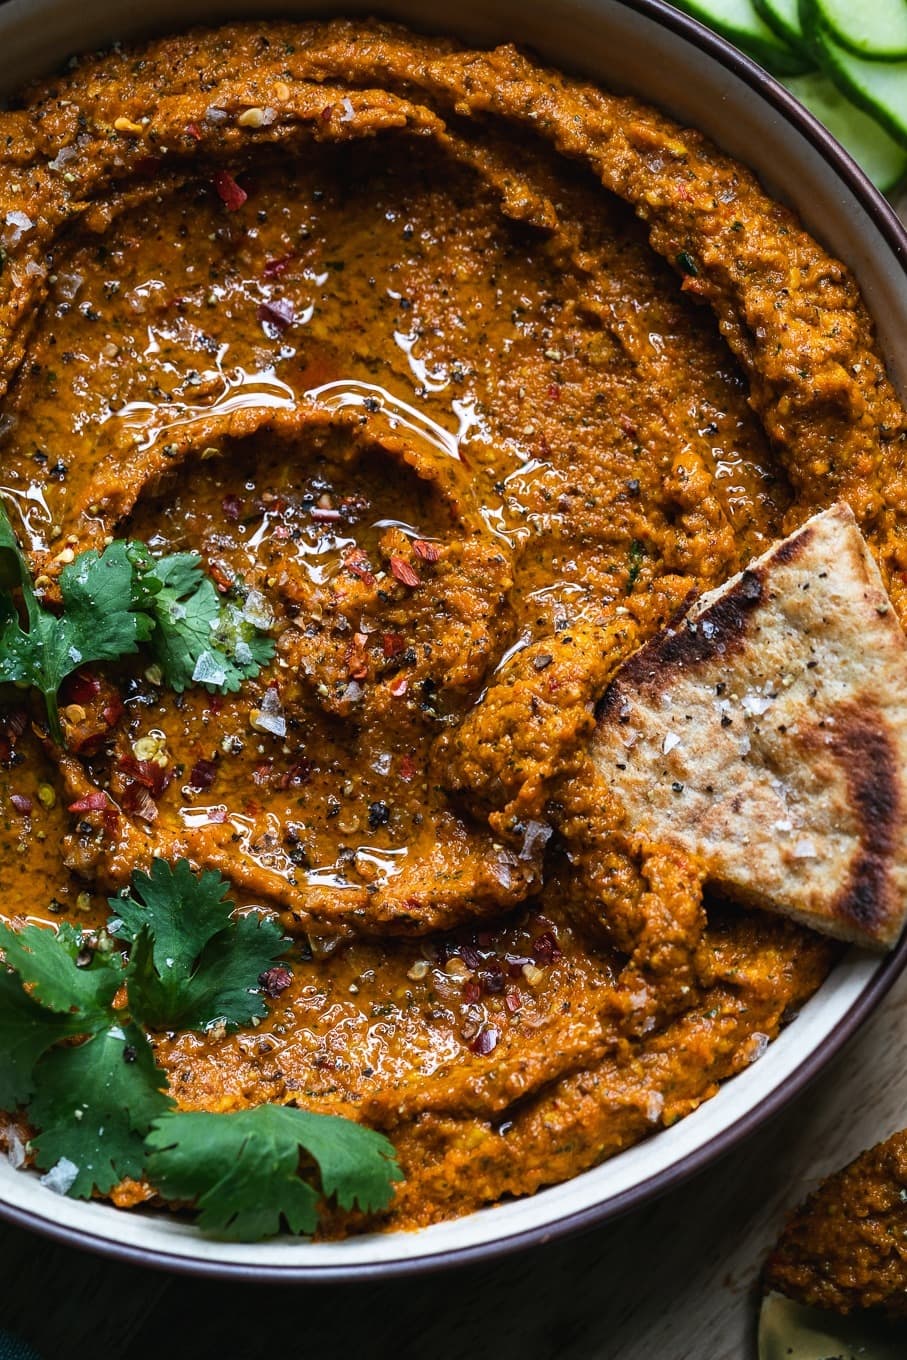 Bowl of homemade Harissa Carrot Dip garnished with cilantro